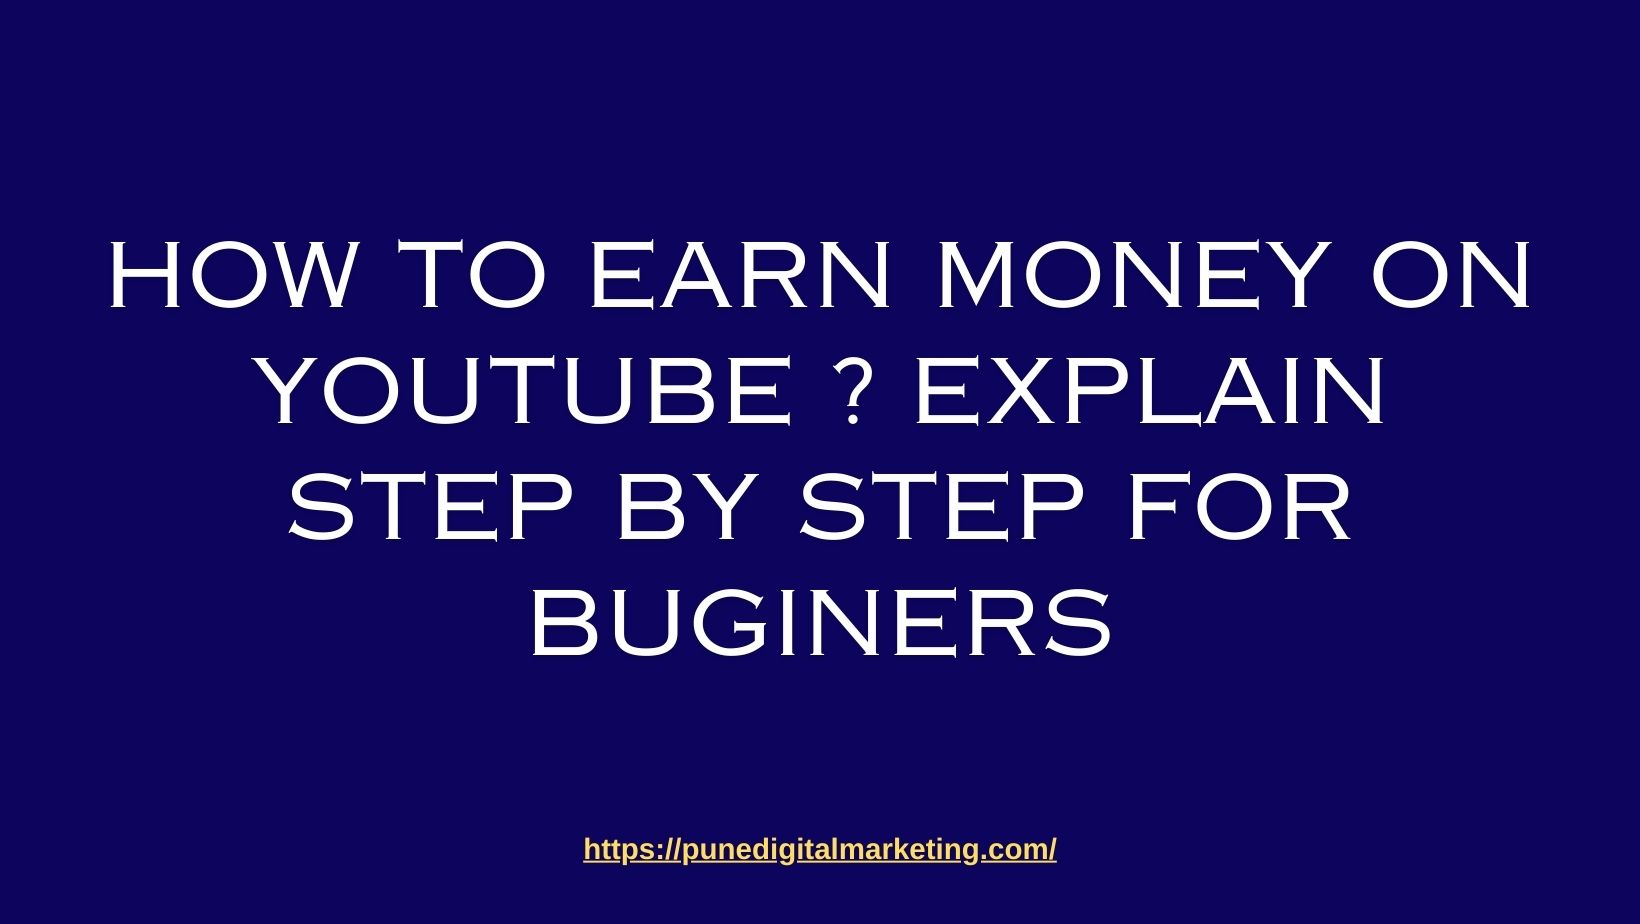 How to earn money on YouTube ? Explain Step by step for buginers